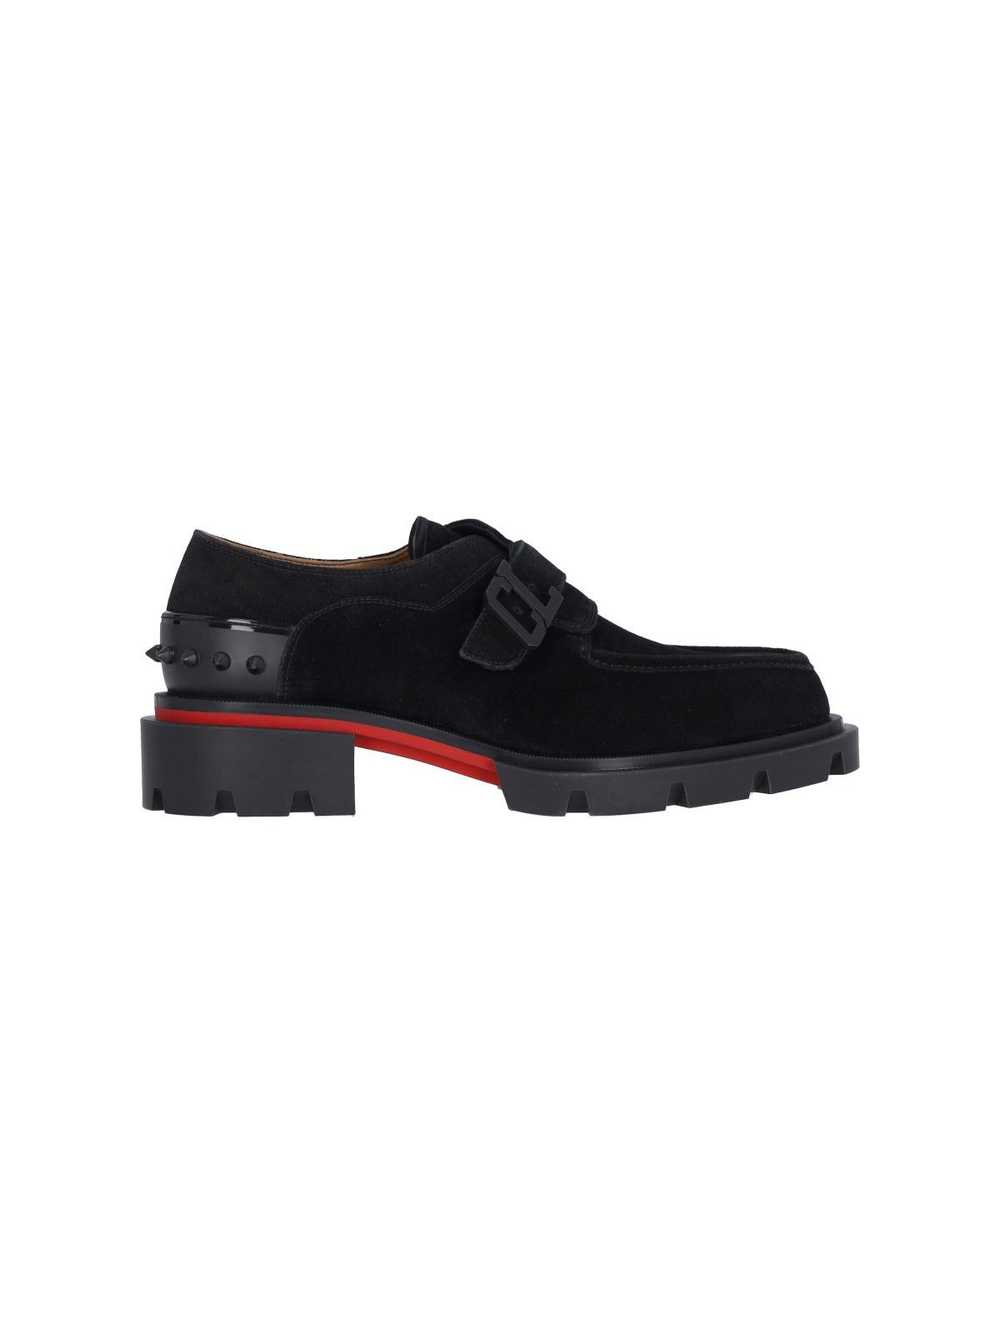 Christian Louboutin SUEDE LOAFERS - image 1